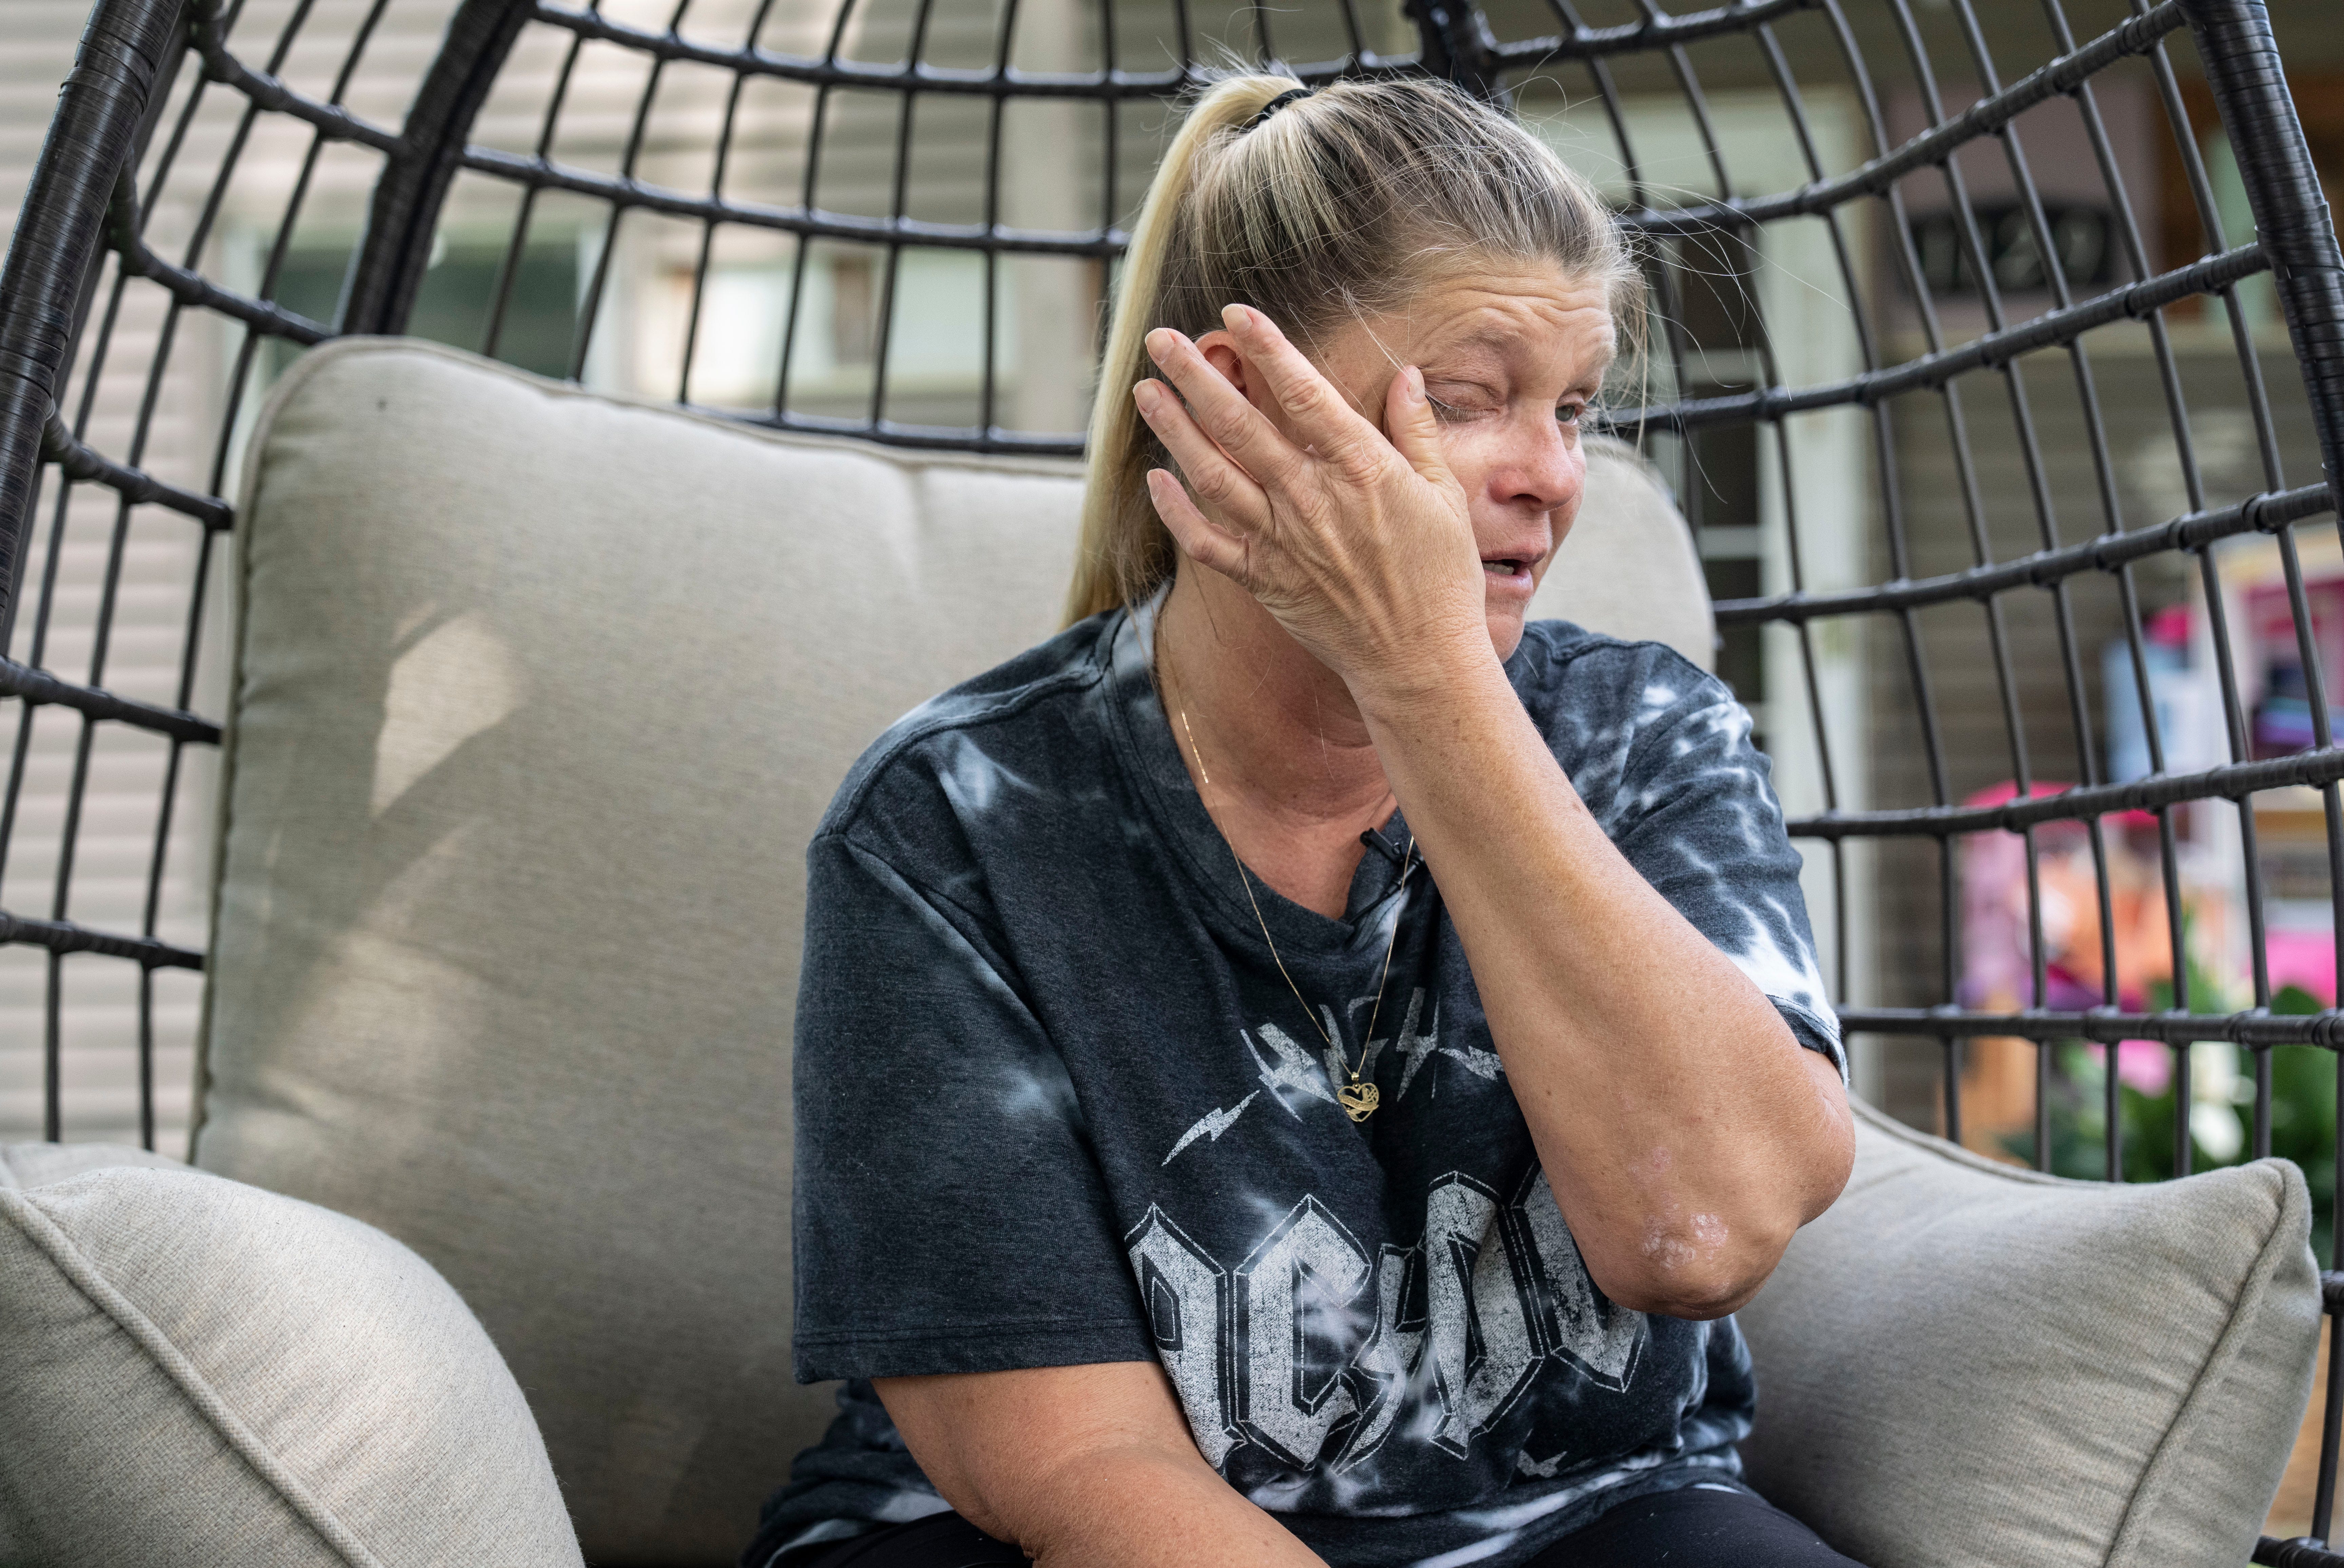 Tina Latham wipes tears from her eyes while talking about her daughter, Courtney Smith, who was found dead after a night partying with friends at two bars in Indianapolis.